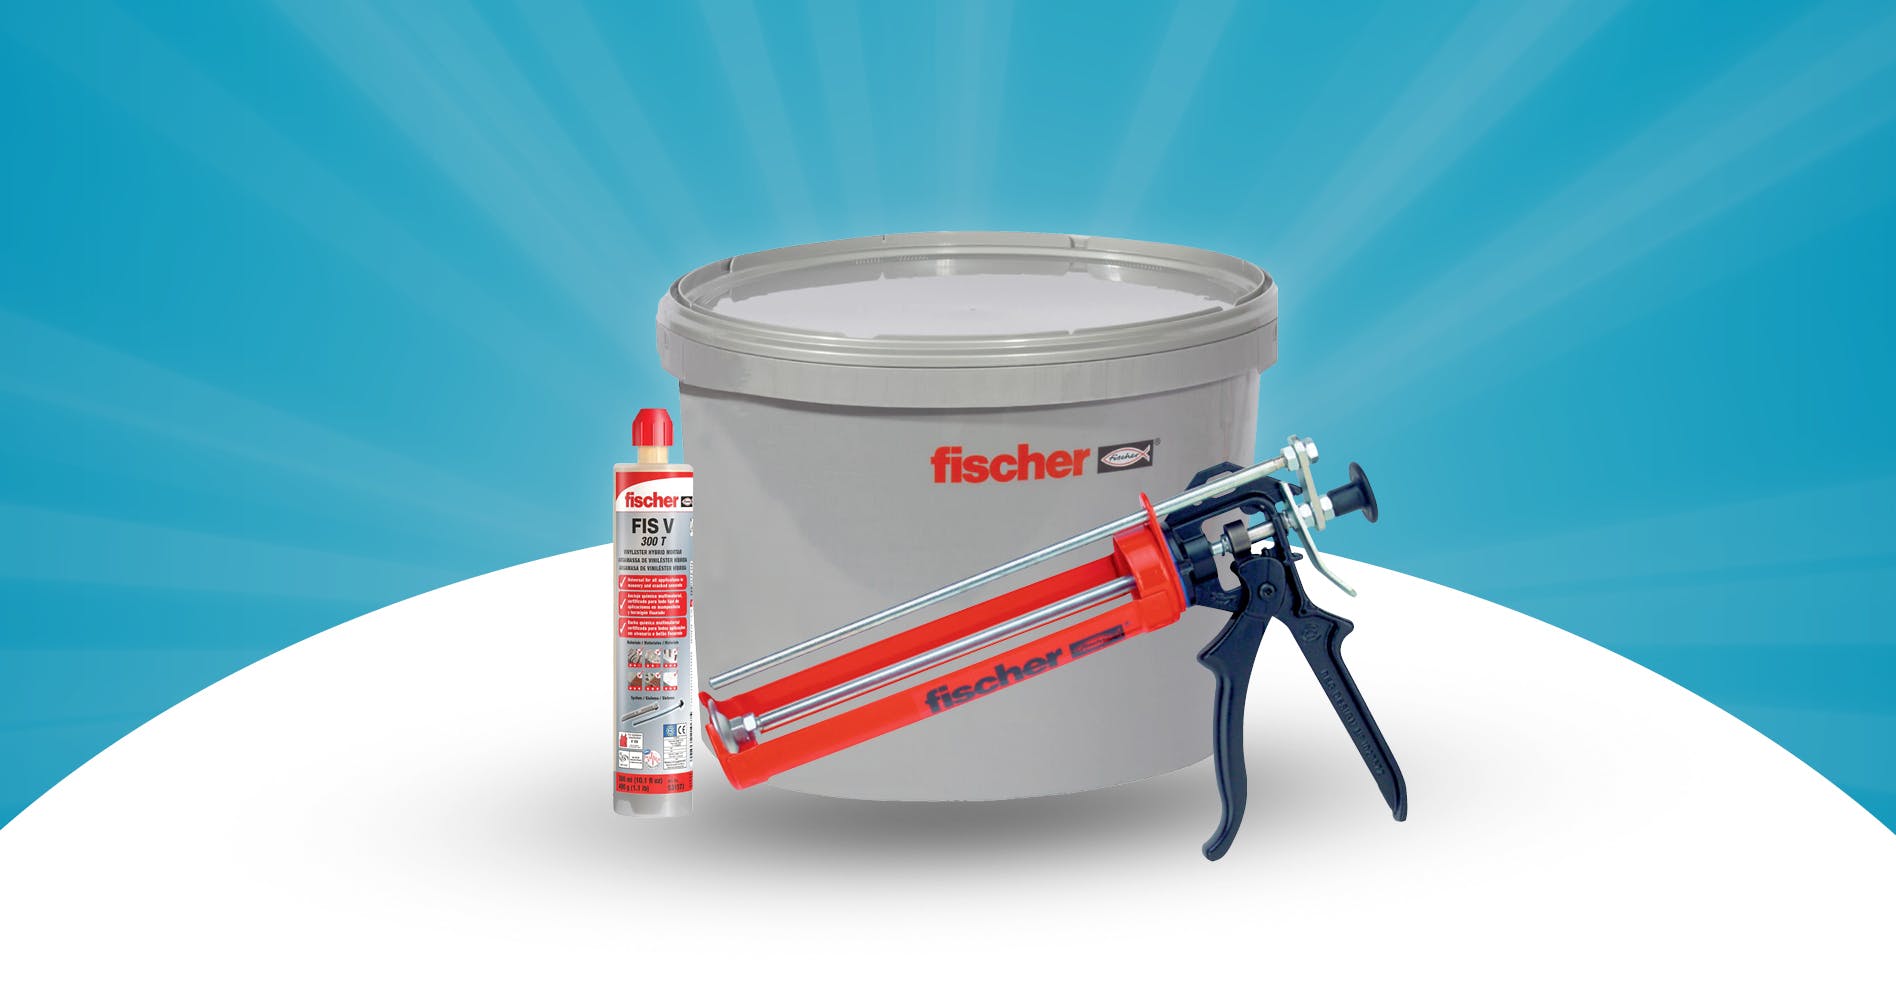 Free gun with every full bucket of fischer V 300 T injection mortar purchased!